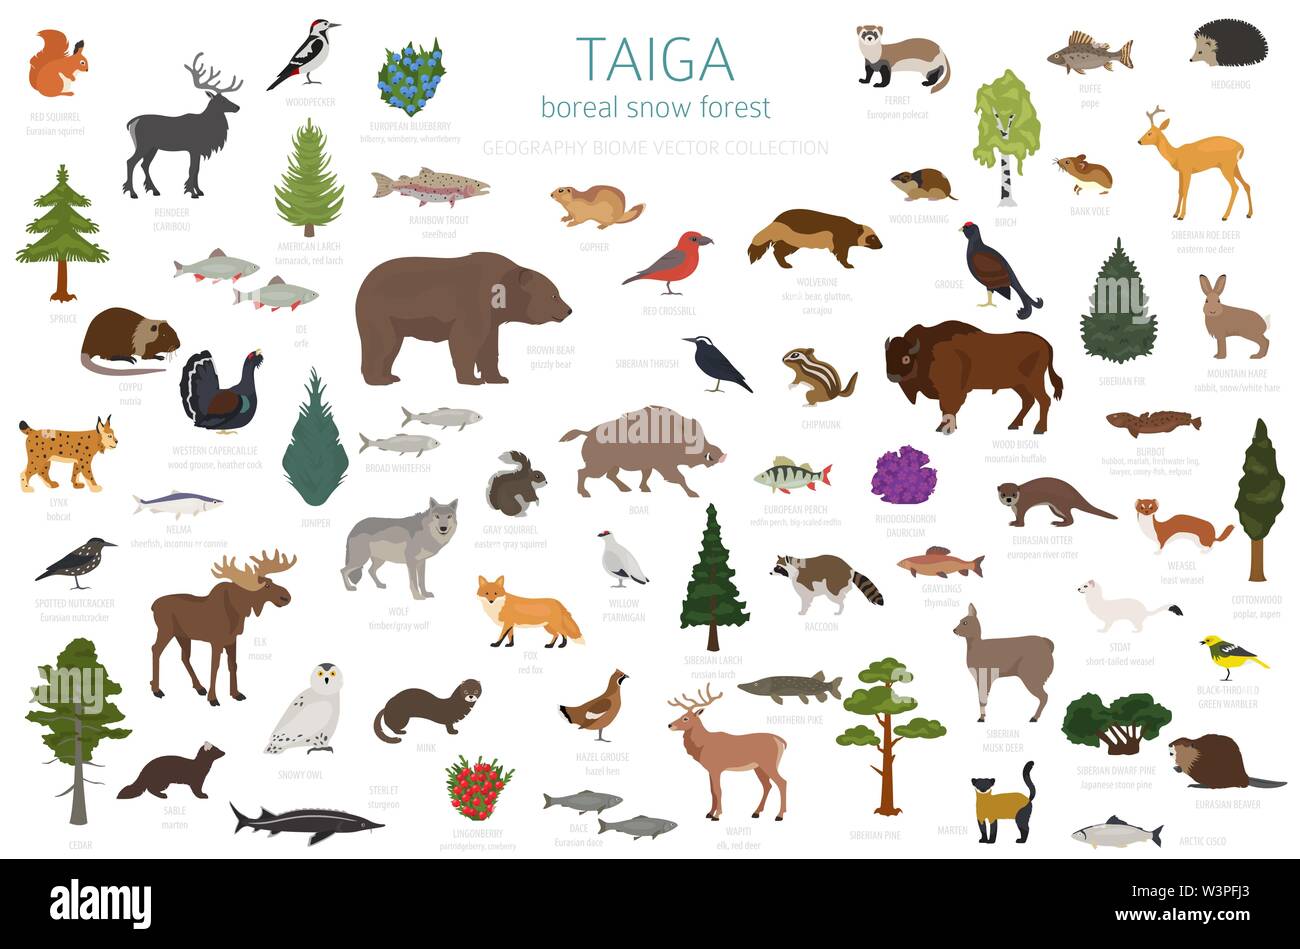 Taiga biome, boreal snow forest. Terrestrial ecosystem world map. Animals, birds, fish and plants infographic design. Vector illustration Stock Vector